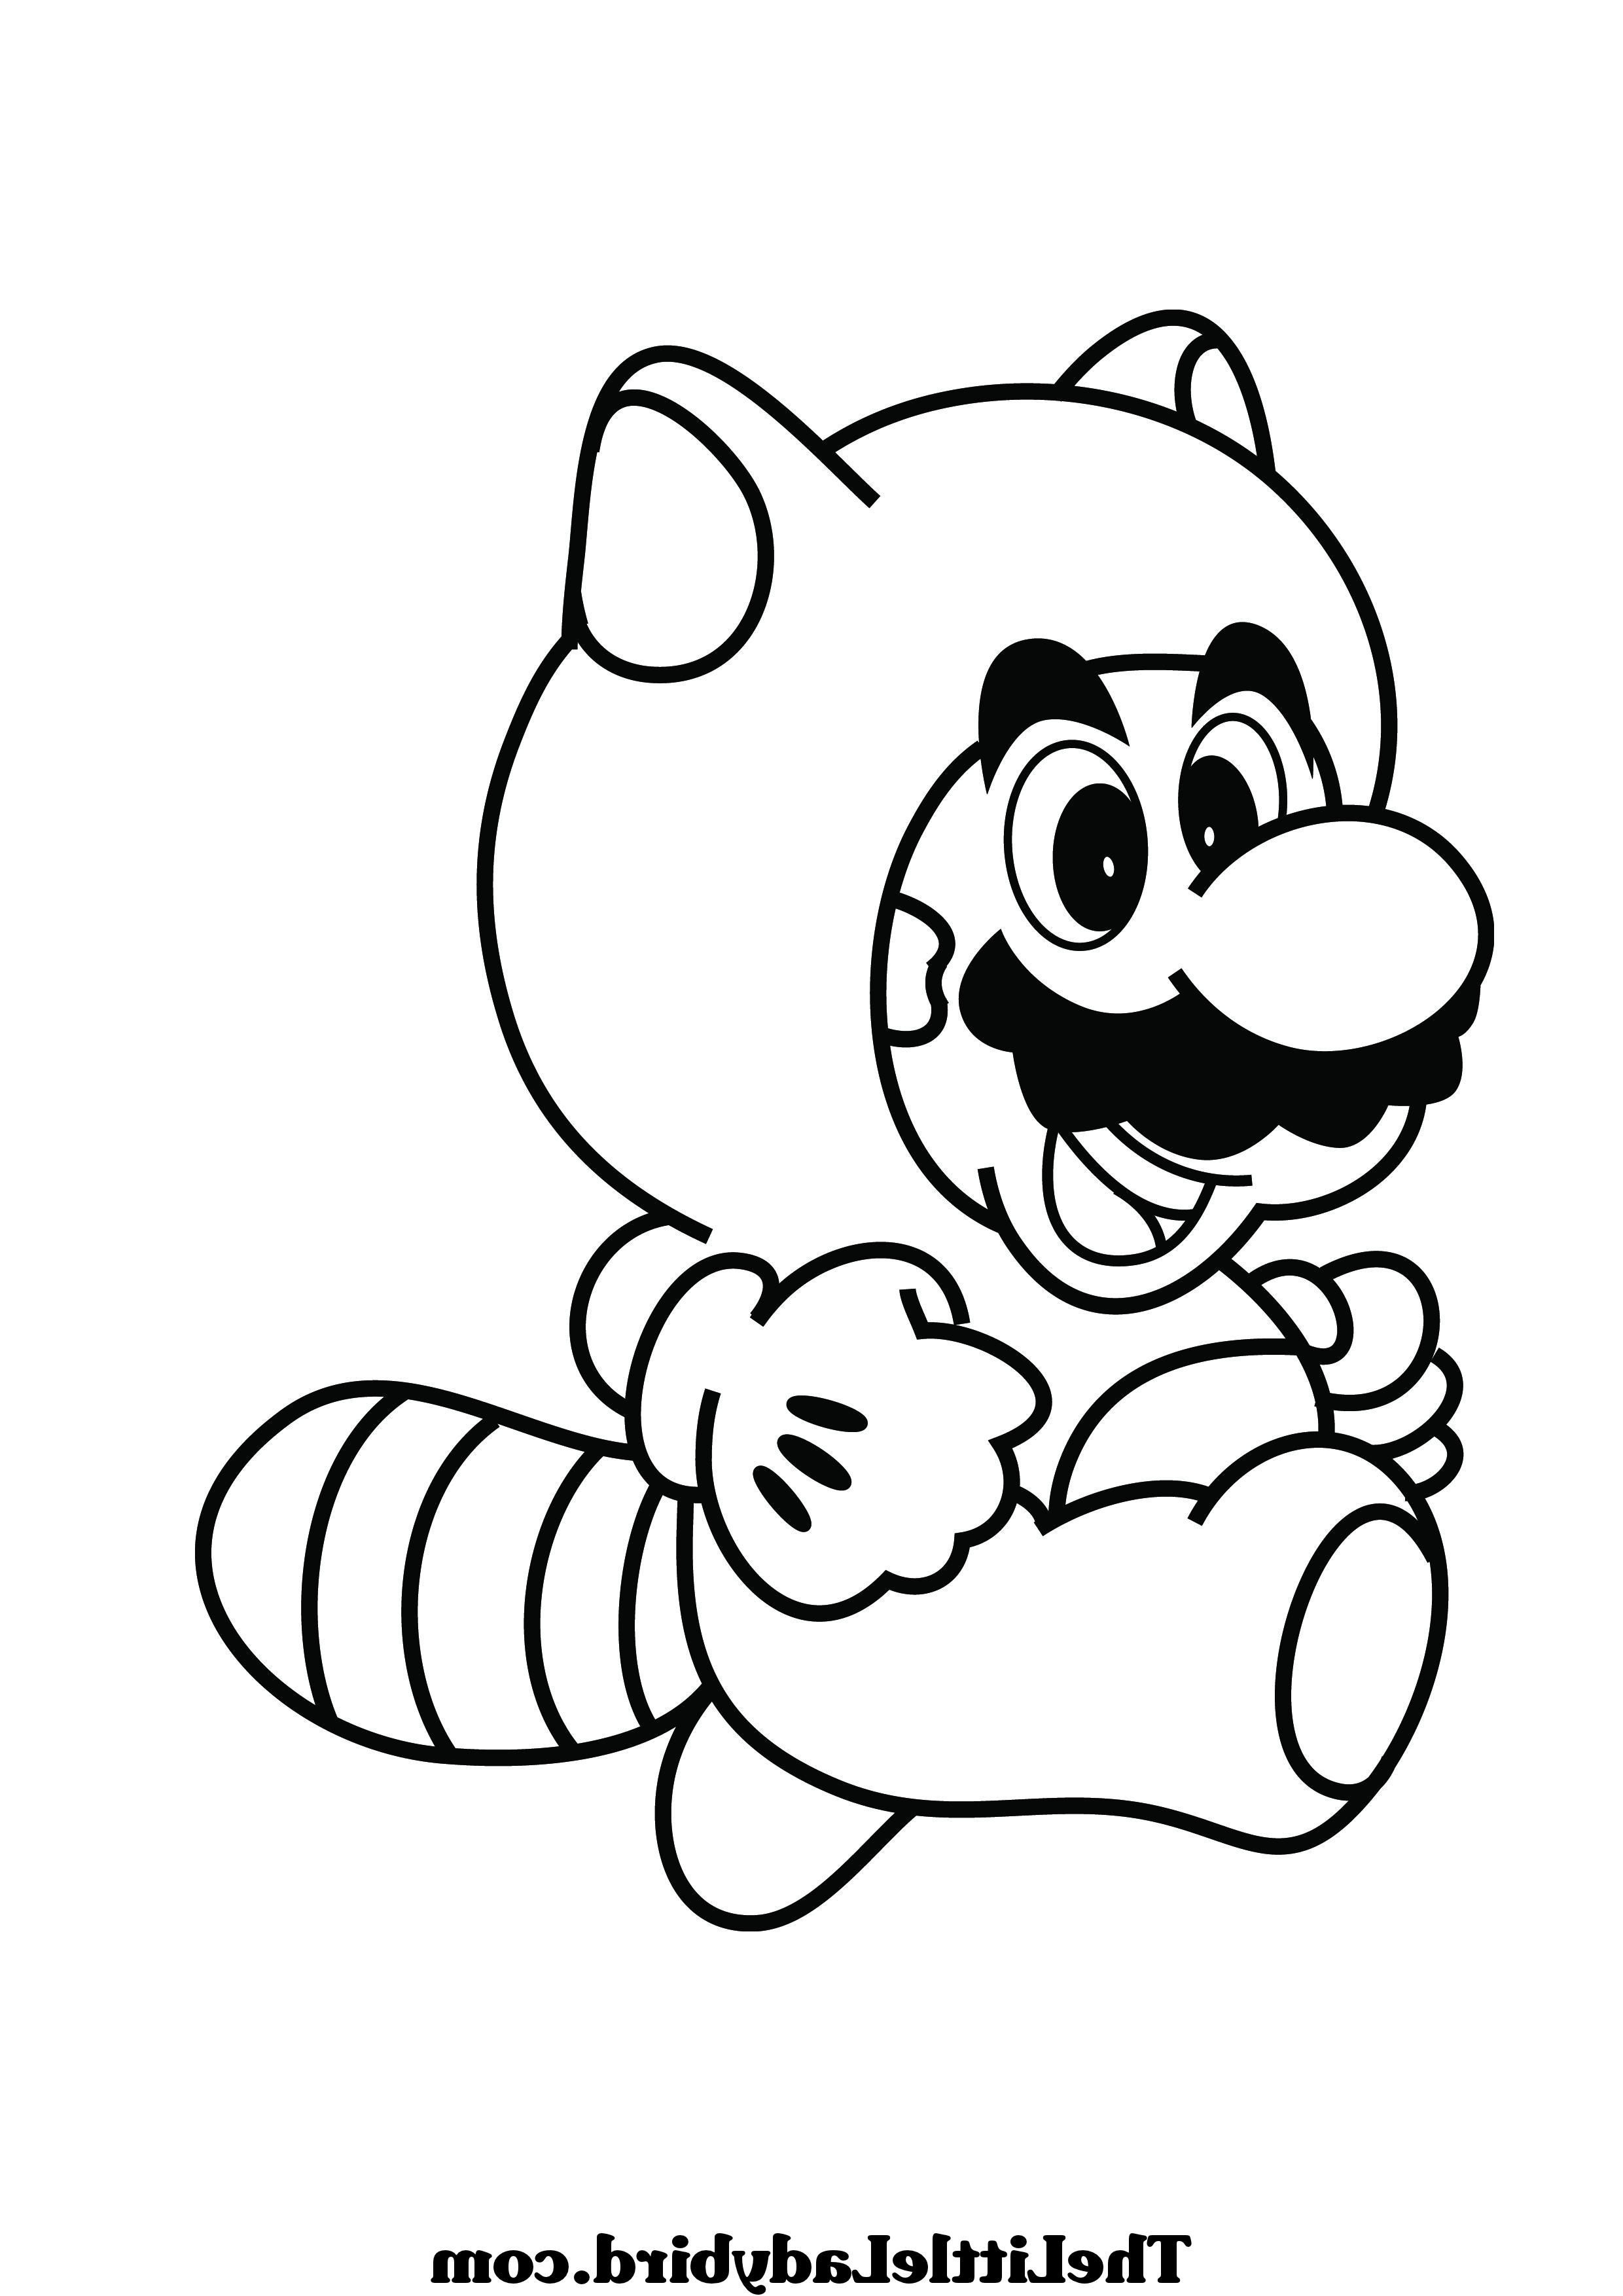 mario bros characters coloring pages to print